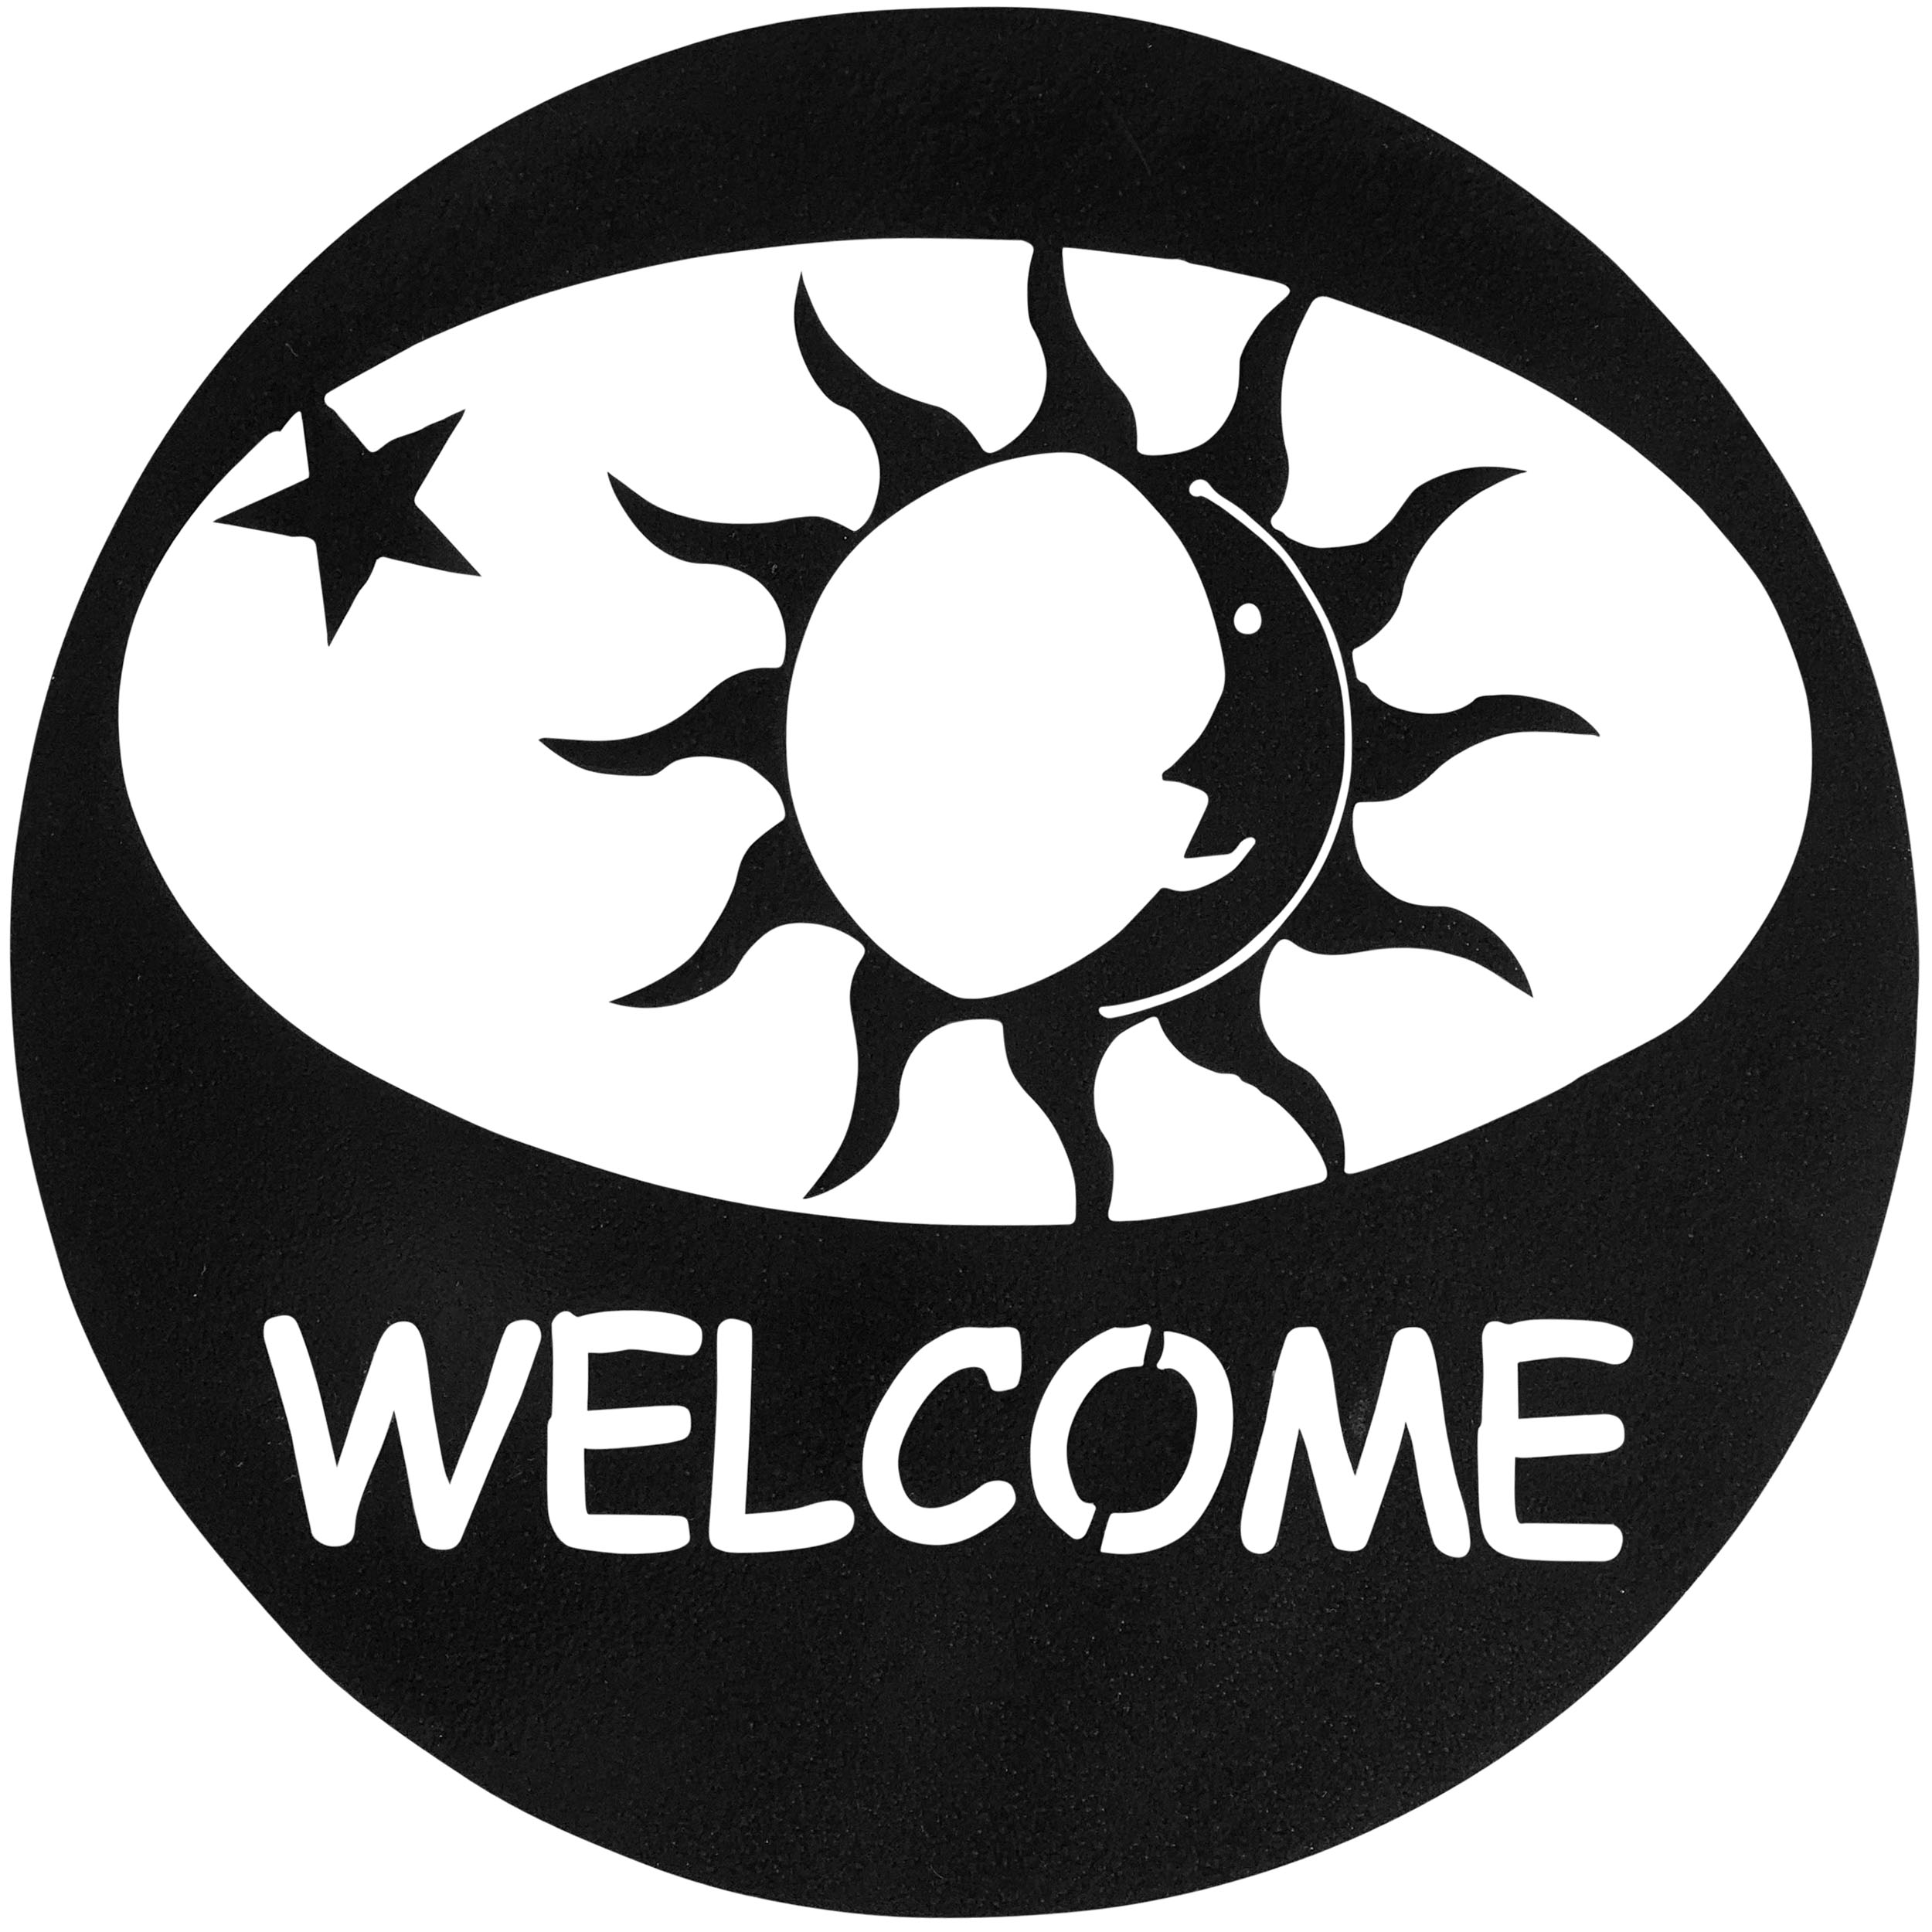 Sun Welcome Circle by Dugout Creek Designs